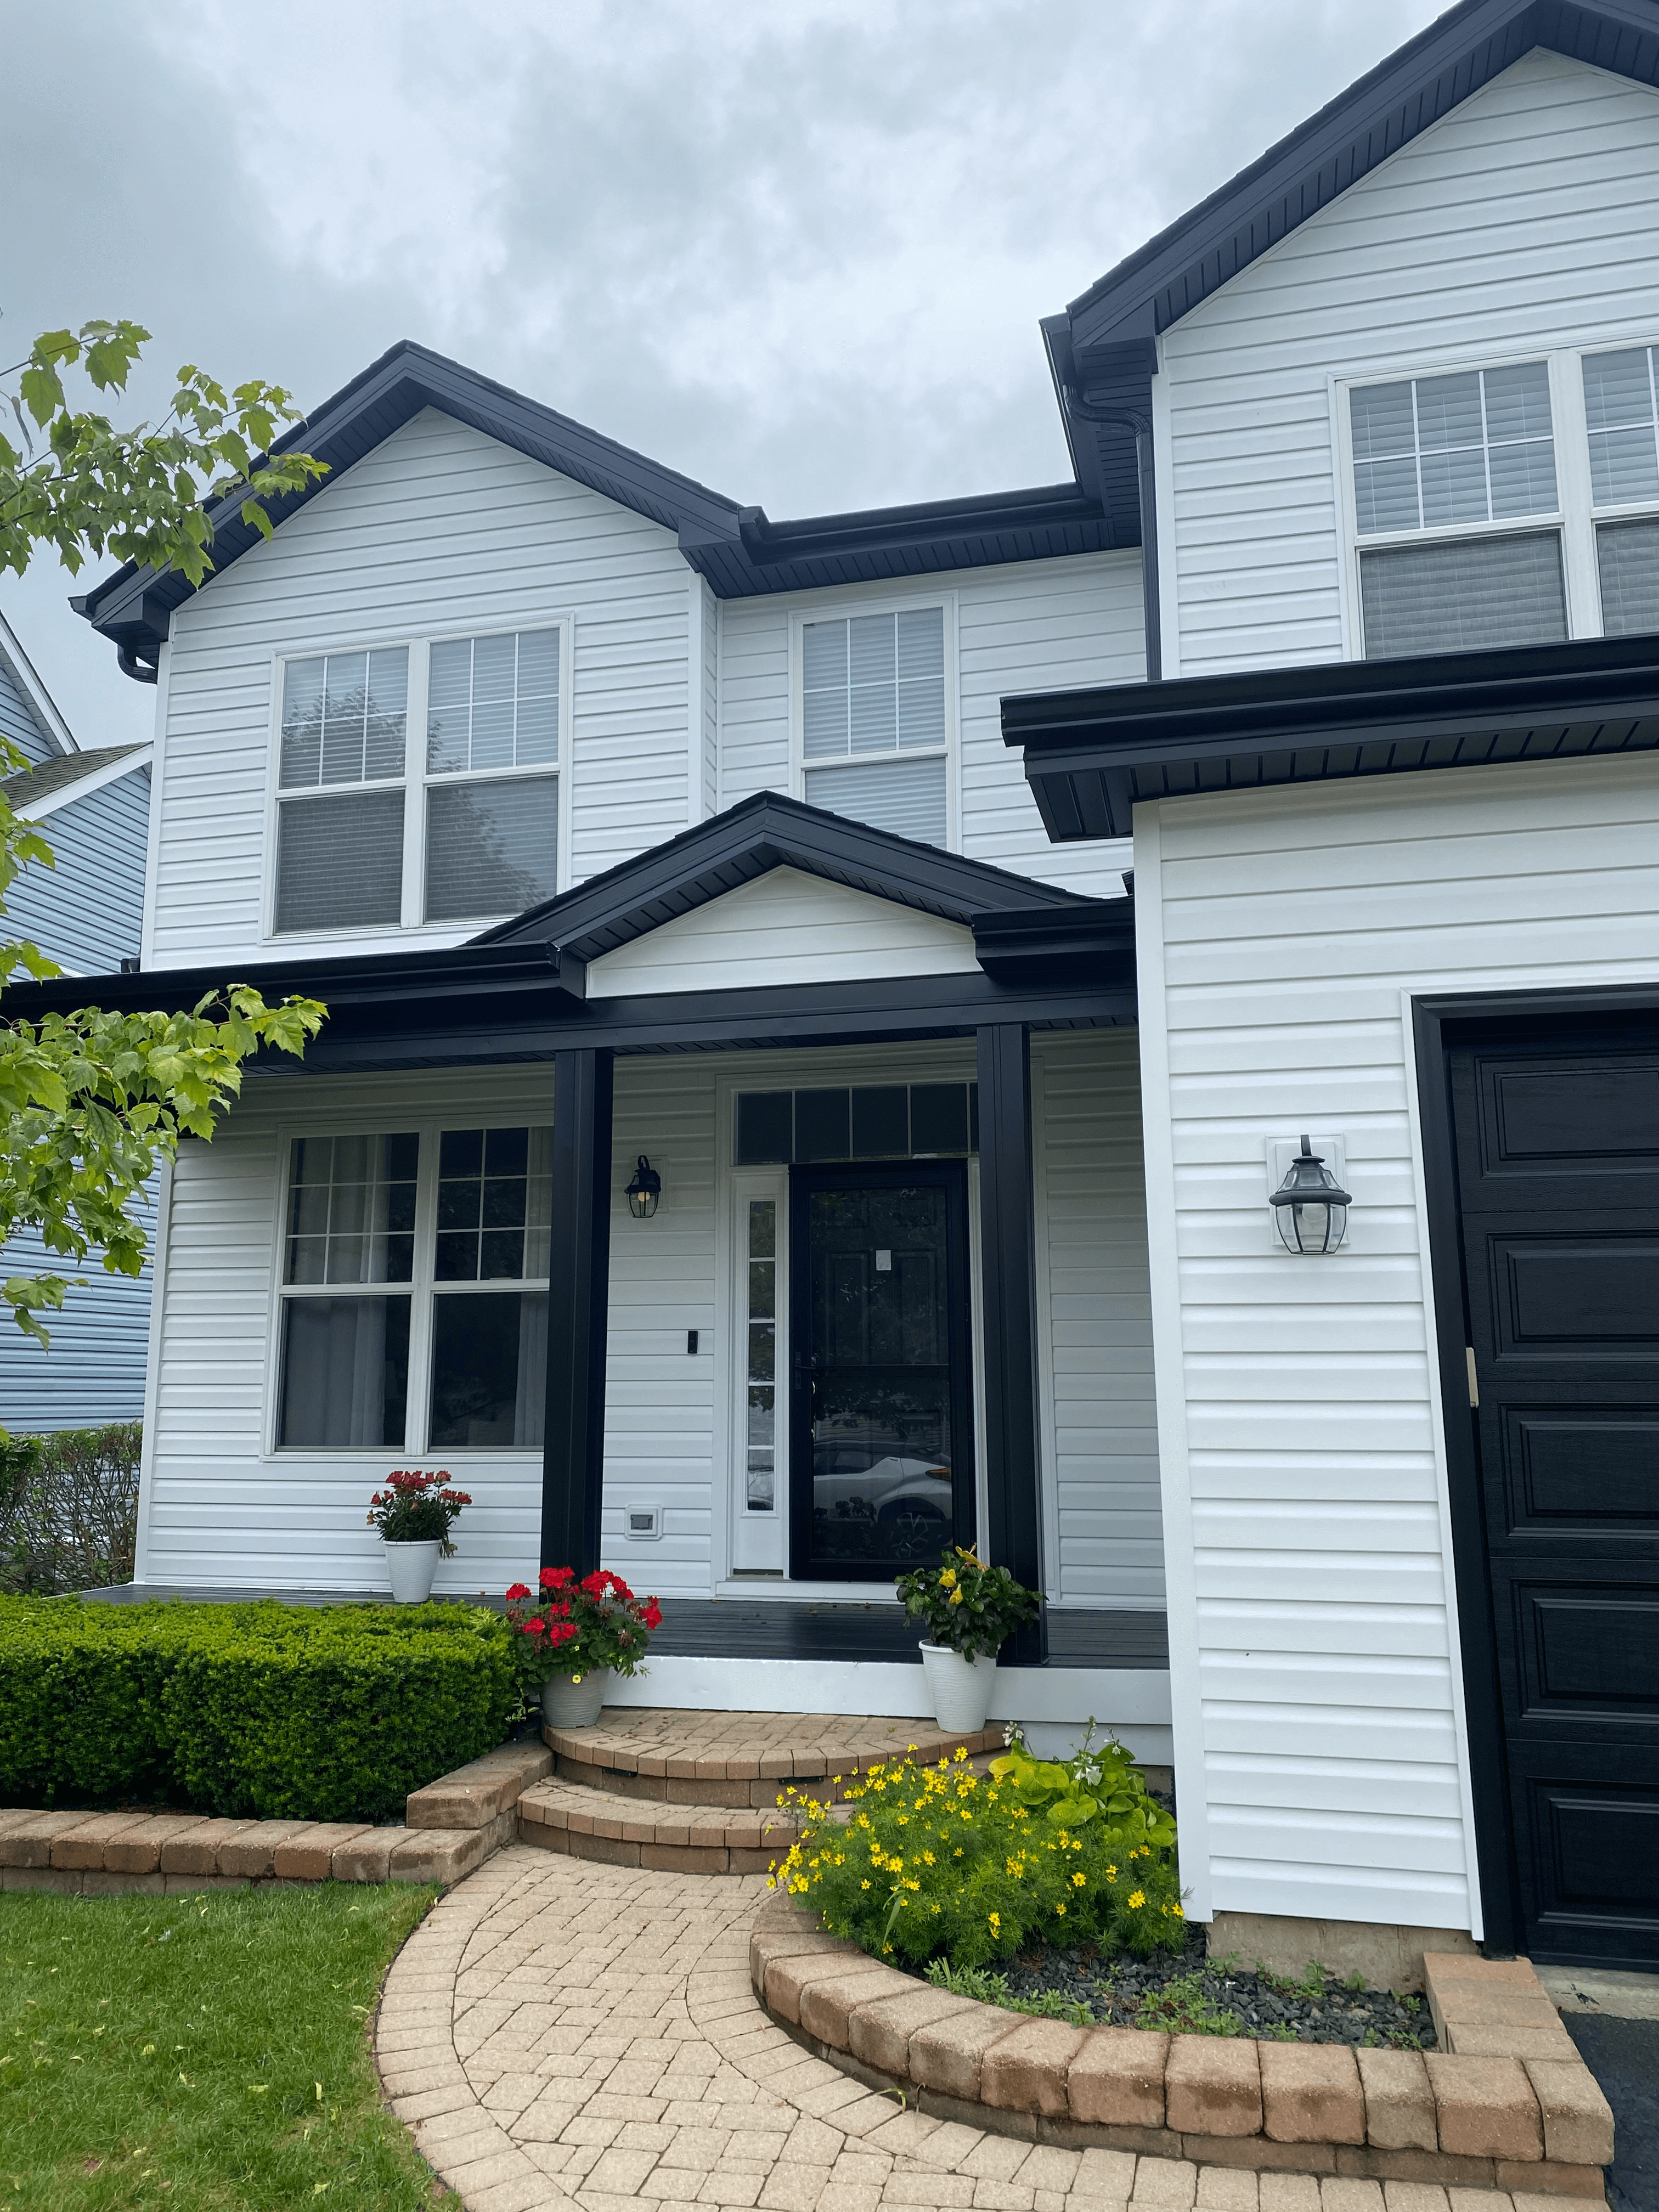 Certainteed Landmark Roof in Moire Black and White Dutchlap Vinyl Siding - Gurnee IL